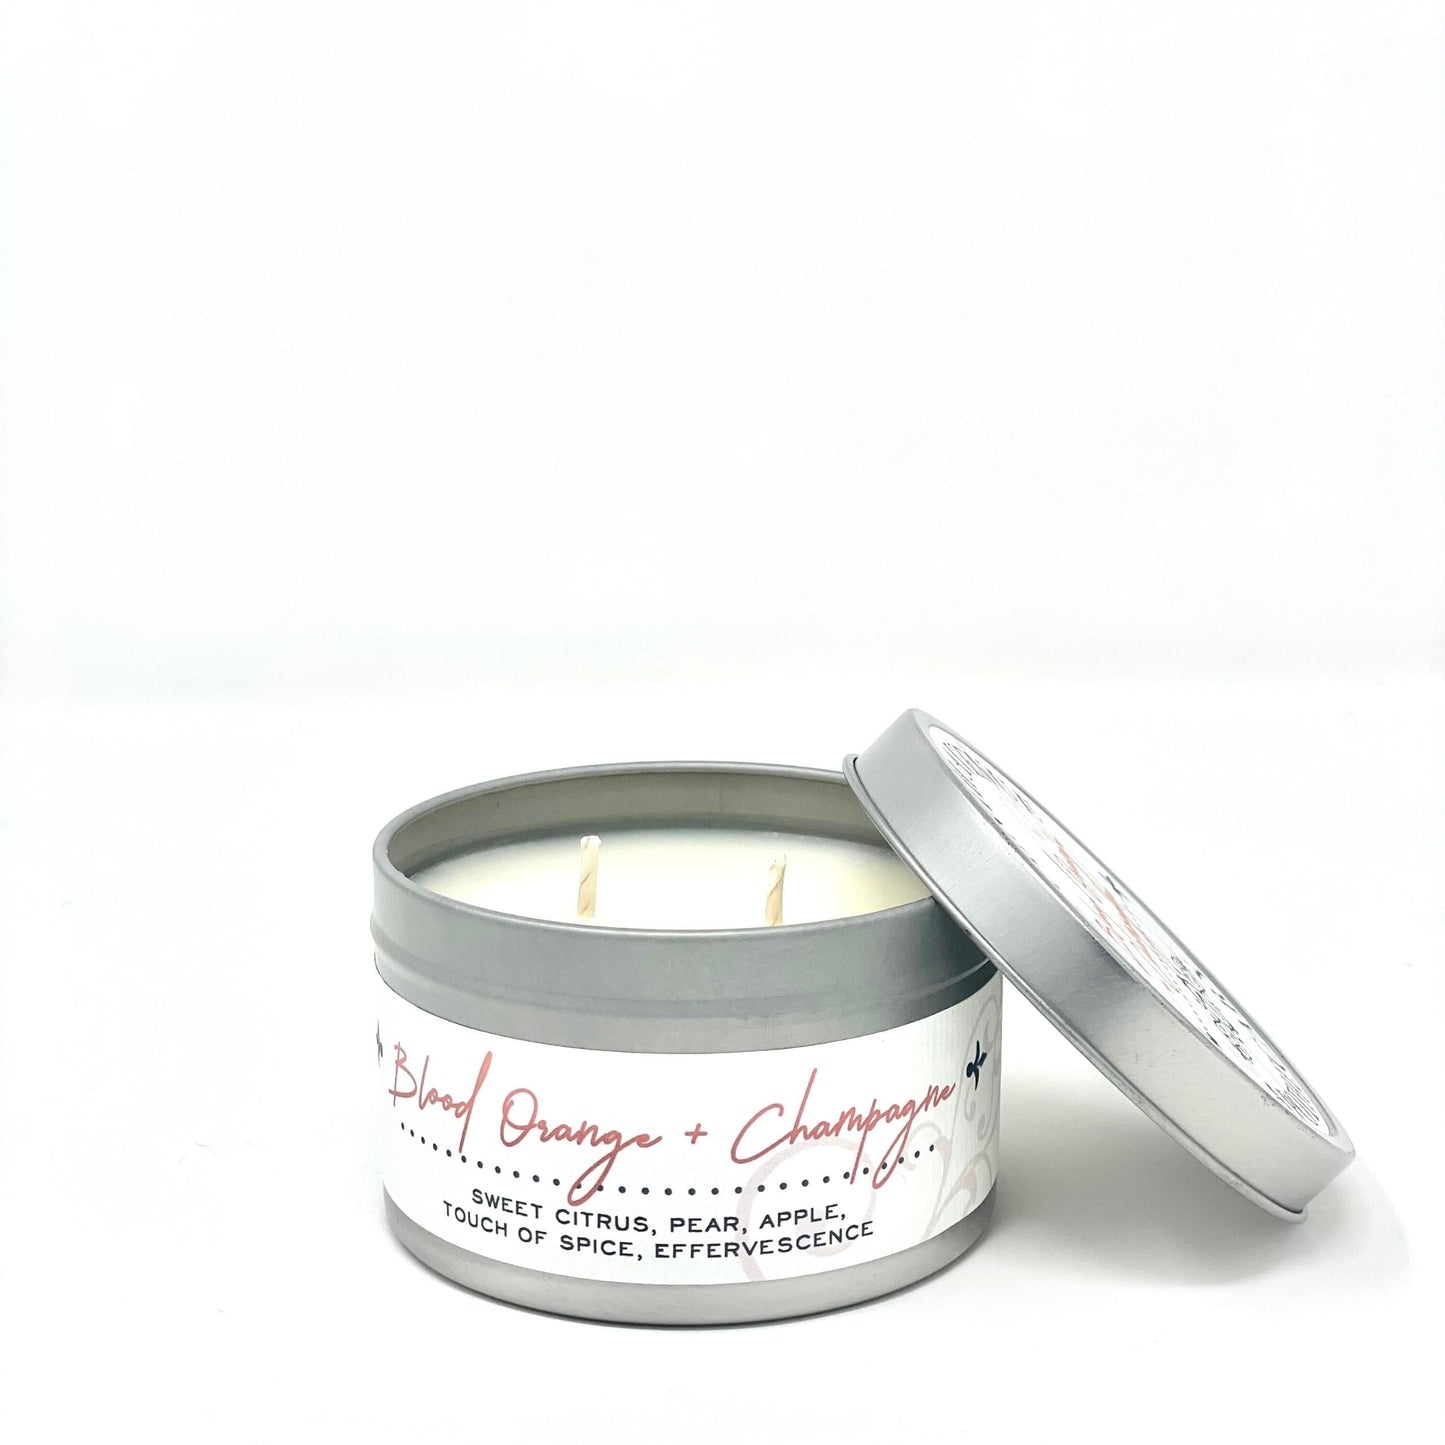 Blood Orange + Champagne Soy Wax Candle - Travel Tin